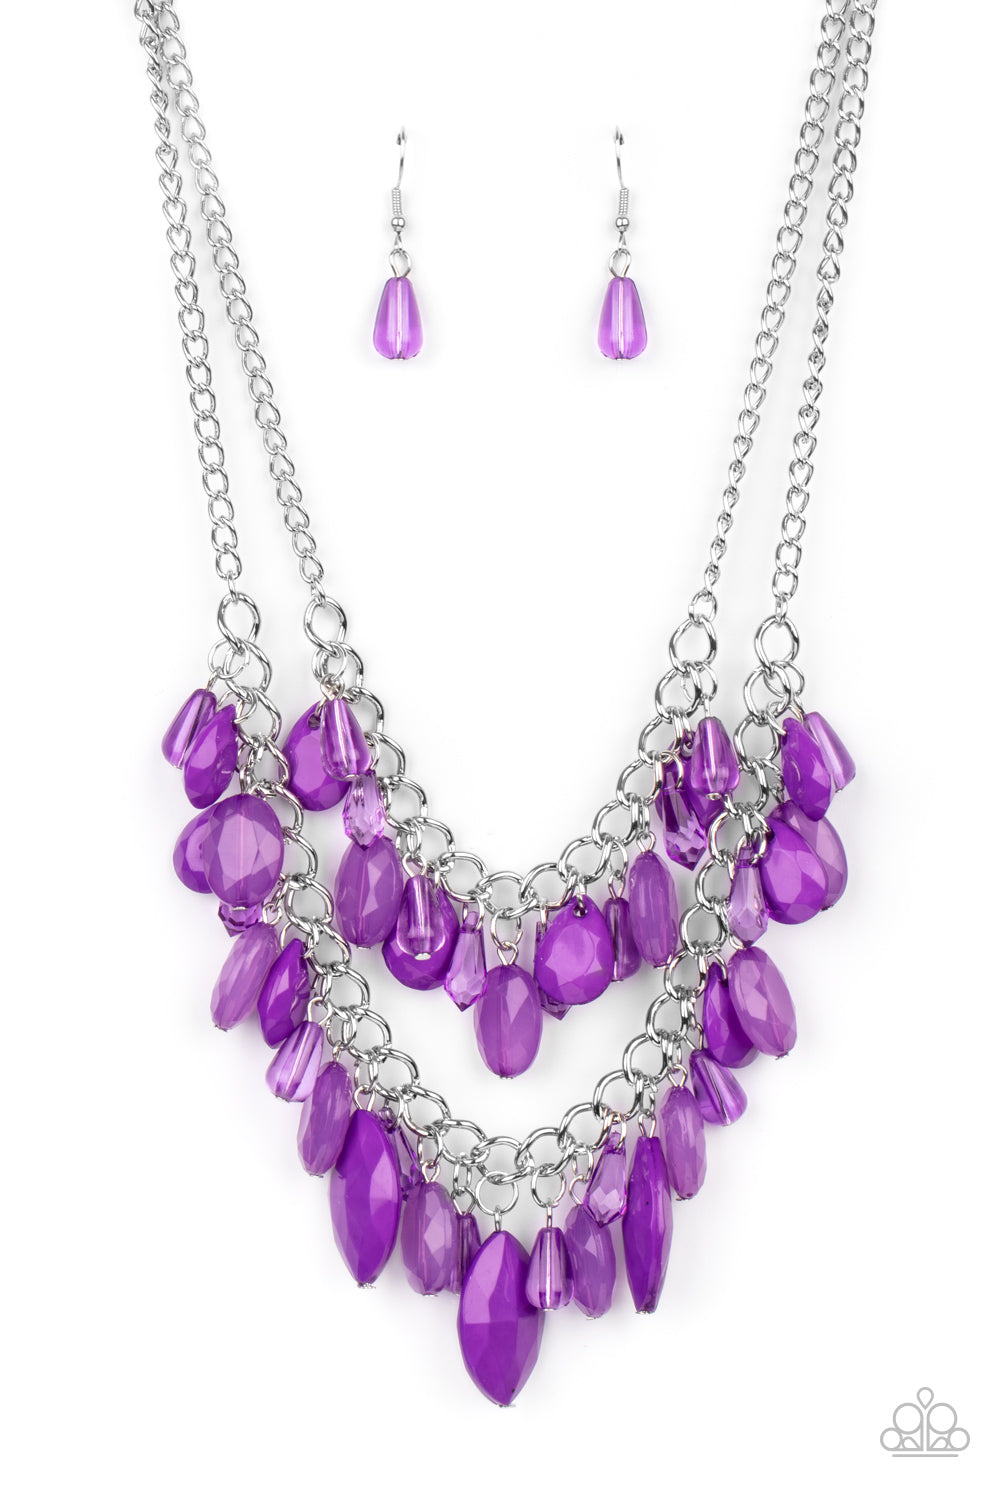 Midsummer Mixer Purple Necklace - Paparazzi Accessories. Varying in opacity, a vivacious collection of purple oval and teardrop acrylic and crystal-like beads cascade from two bold silver chains below the collar for a flirtatiously layered look. Features an adjustable clasp closure.  All Paparazzi Accessories are lead free and nickel free!  Sold as one individual necklace. Includes one pair of matching earrings.